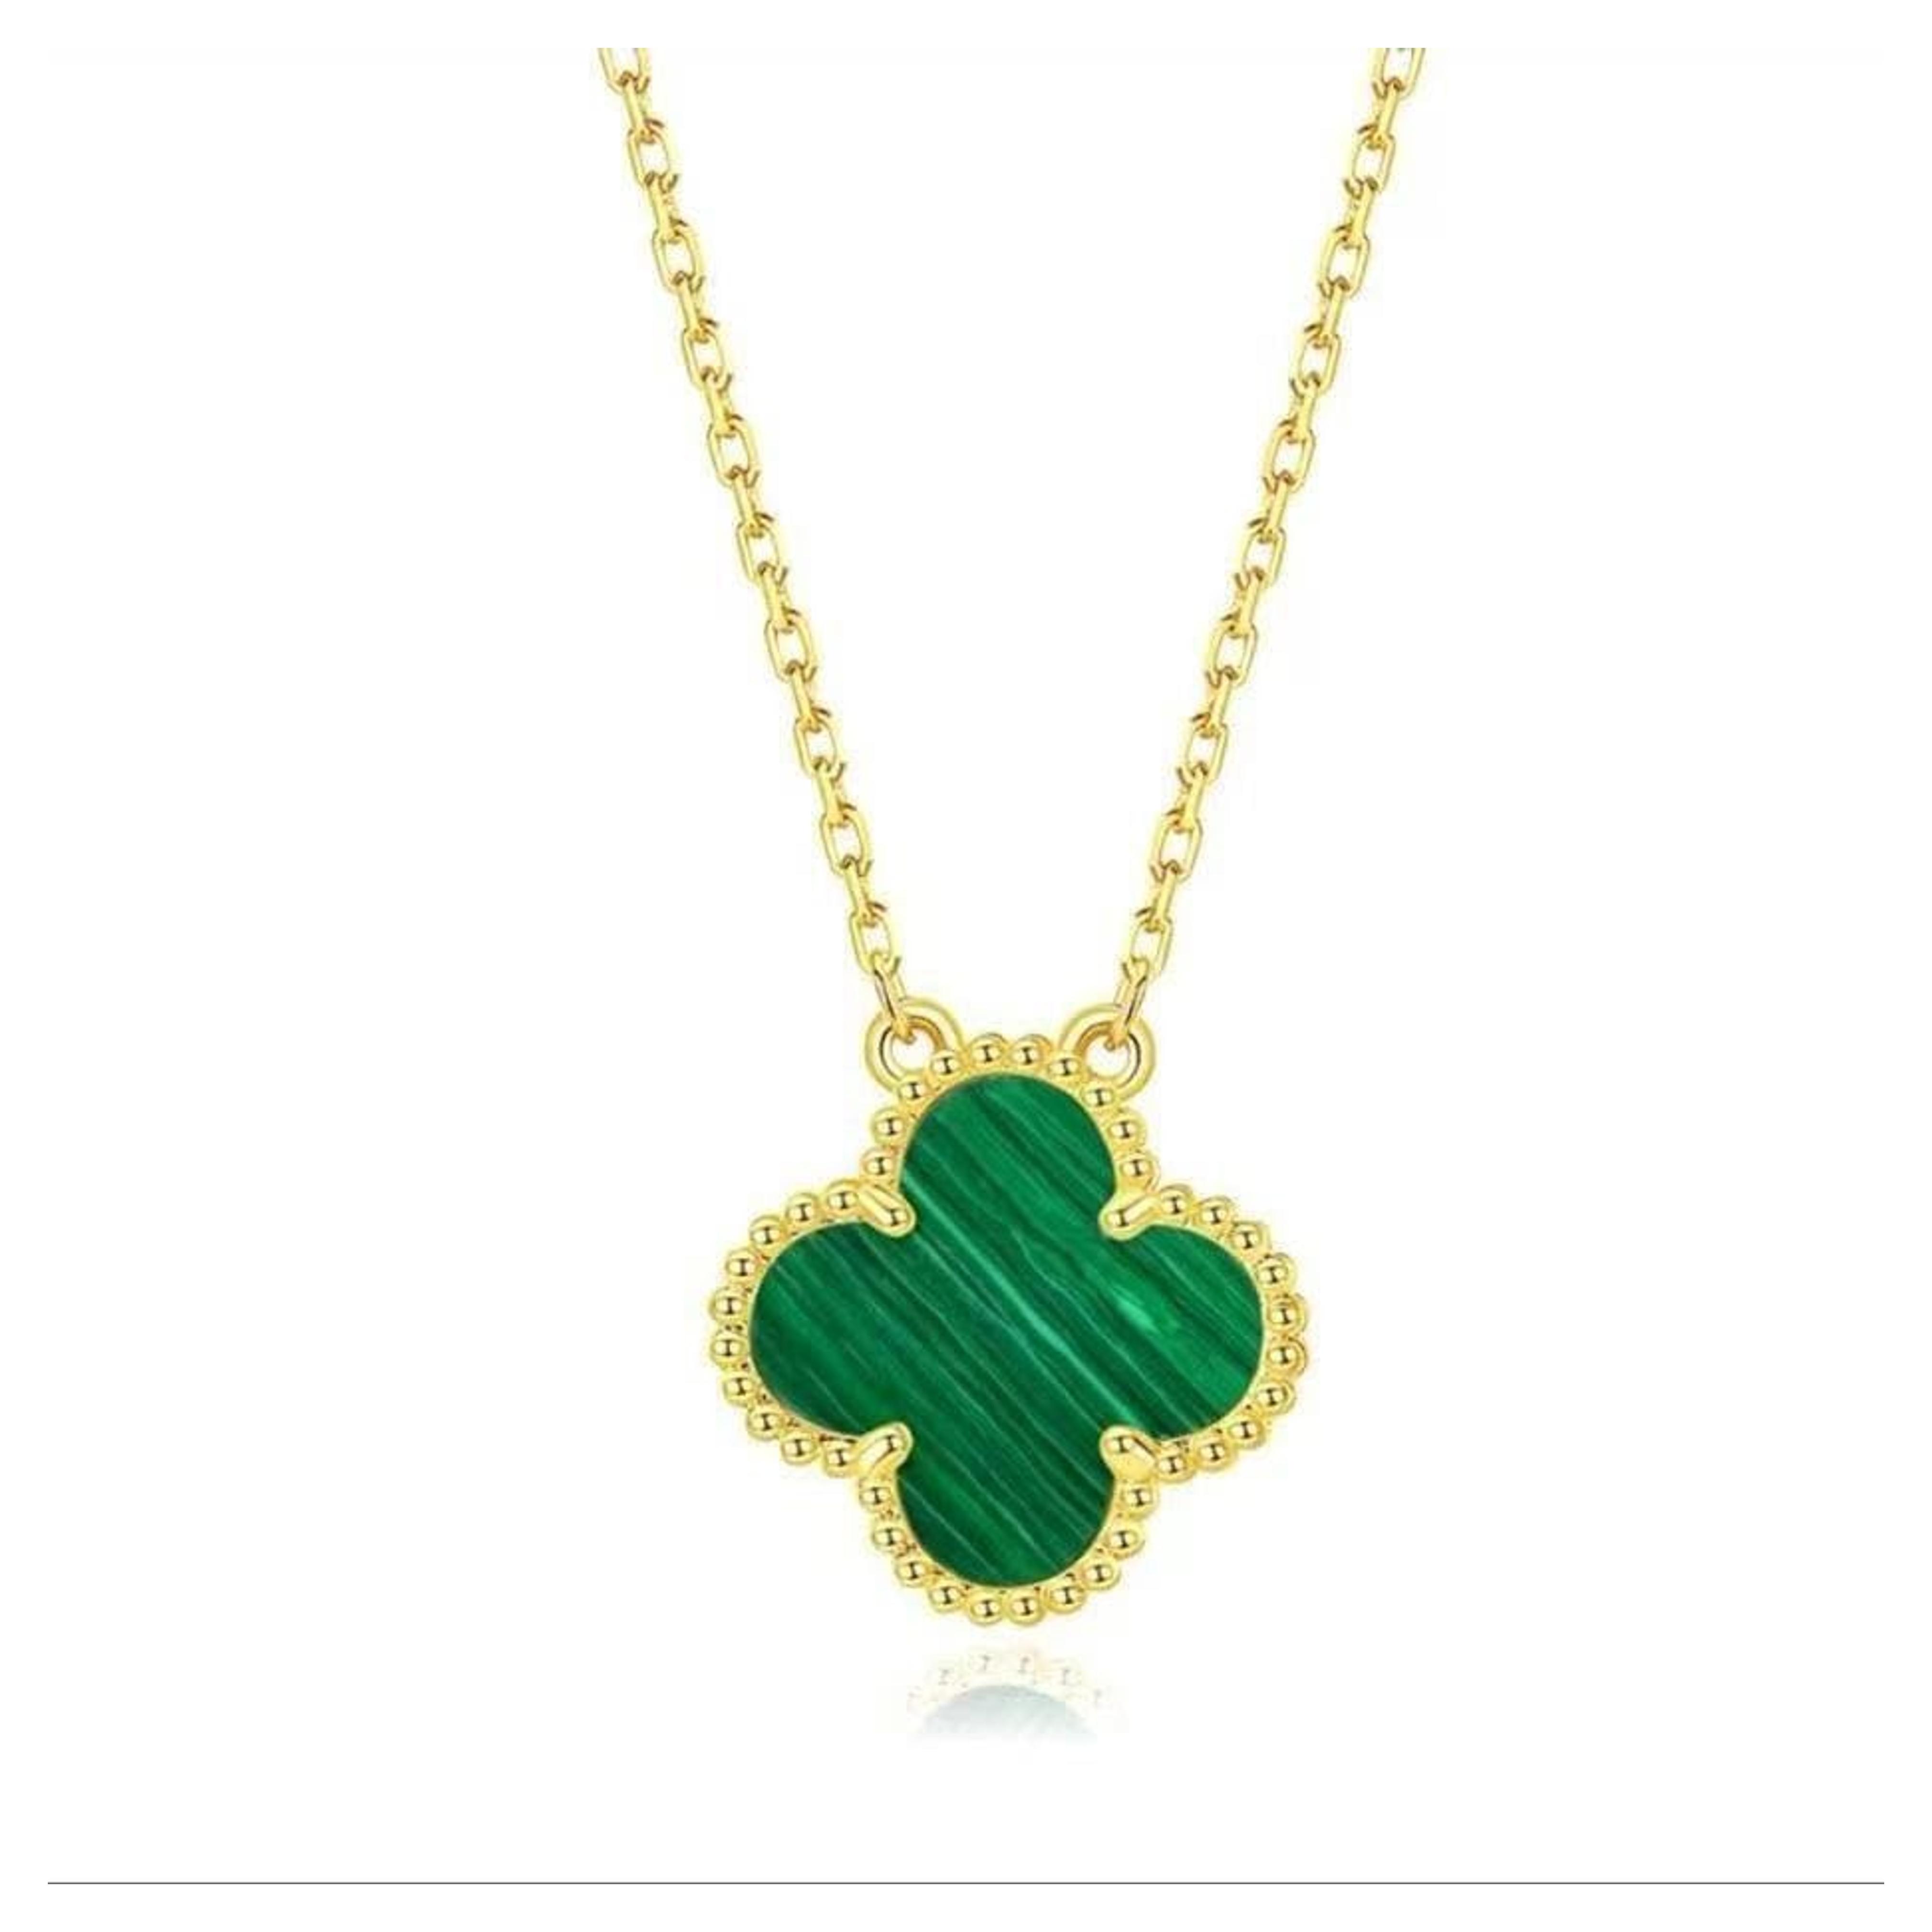 HXSCOO Silver Golden Lucky Four-Leaf Pendant Necklace For Woman White Shell Flower Fine Jewelry 45CM_GOLD-COLOR Green 4 leaves